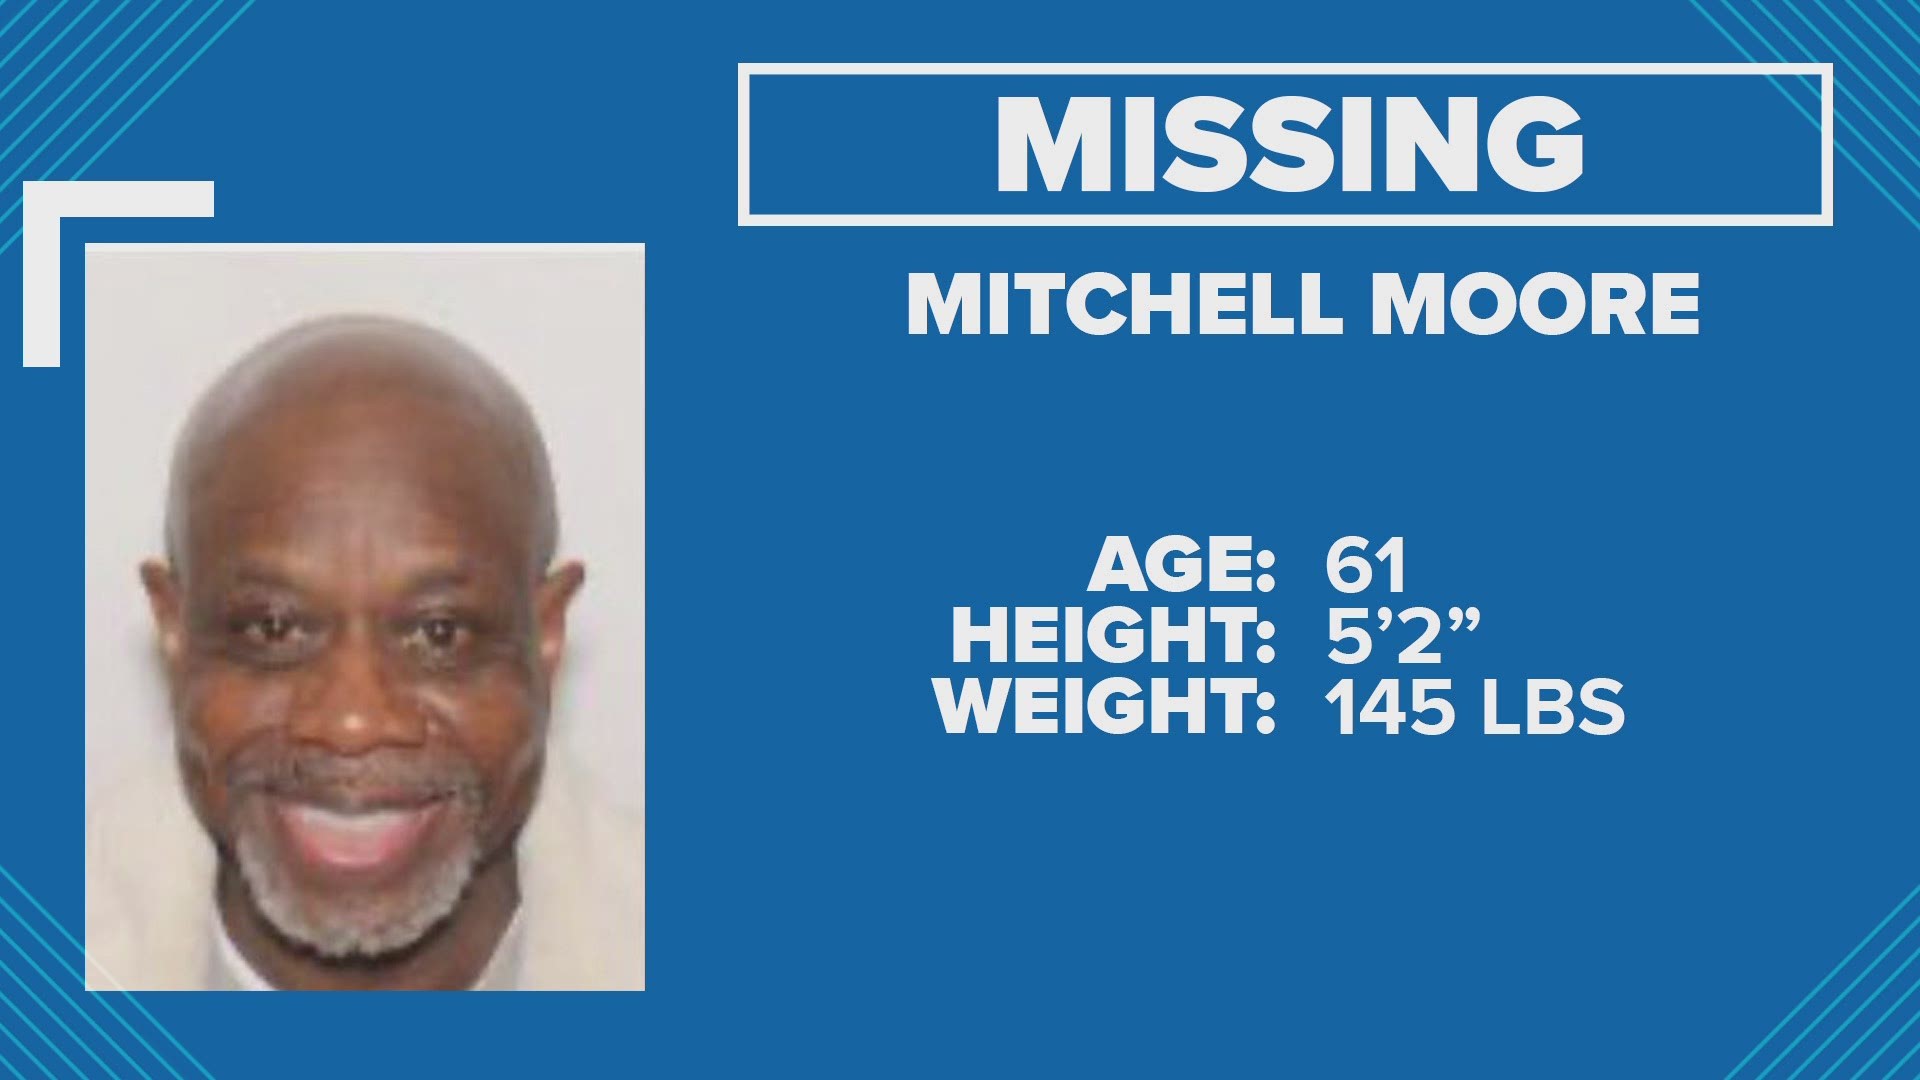 Little Rock police are looking for a missing 61-year-old man last seen on S. Battery Street.